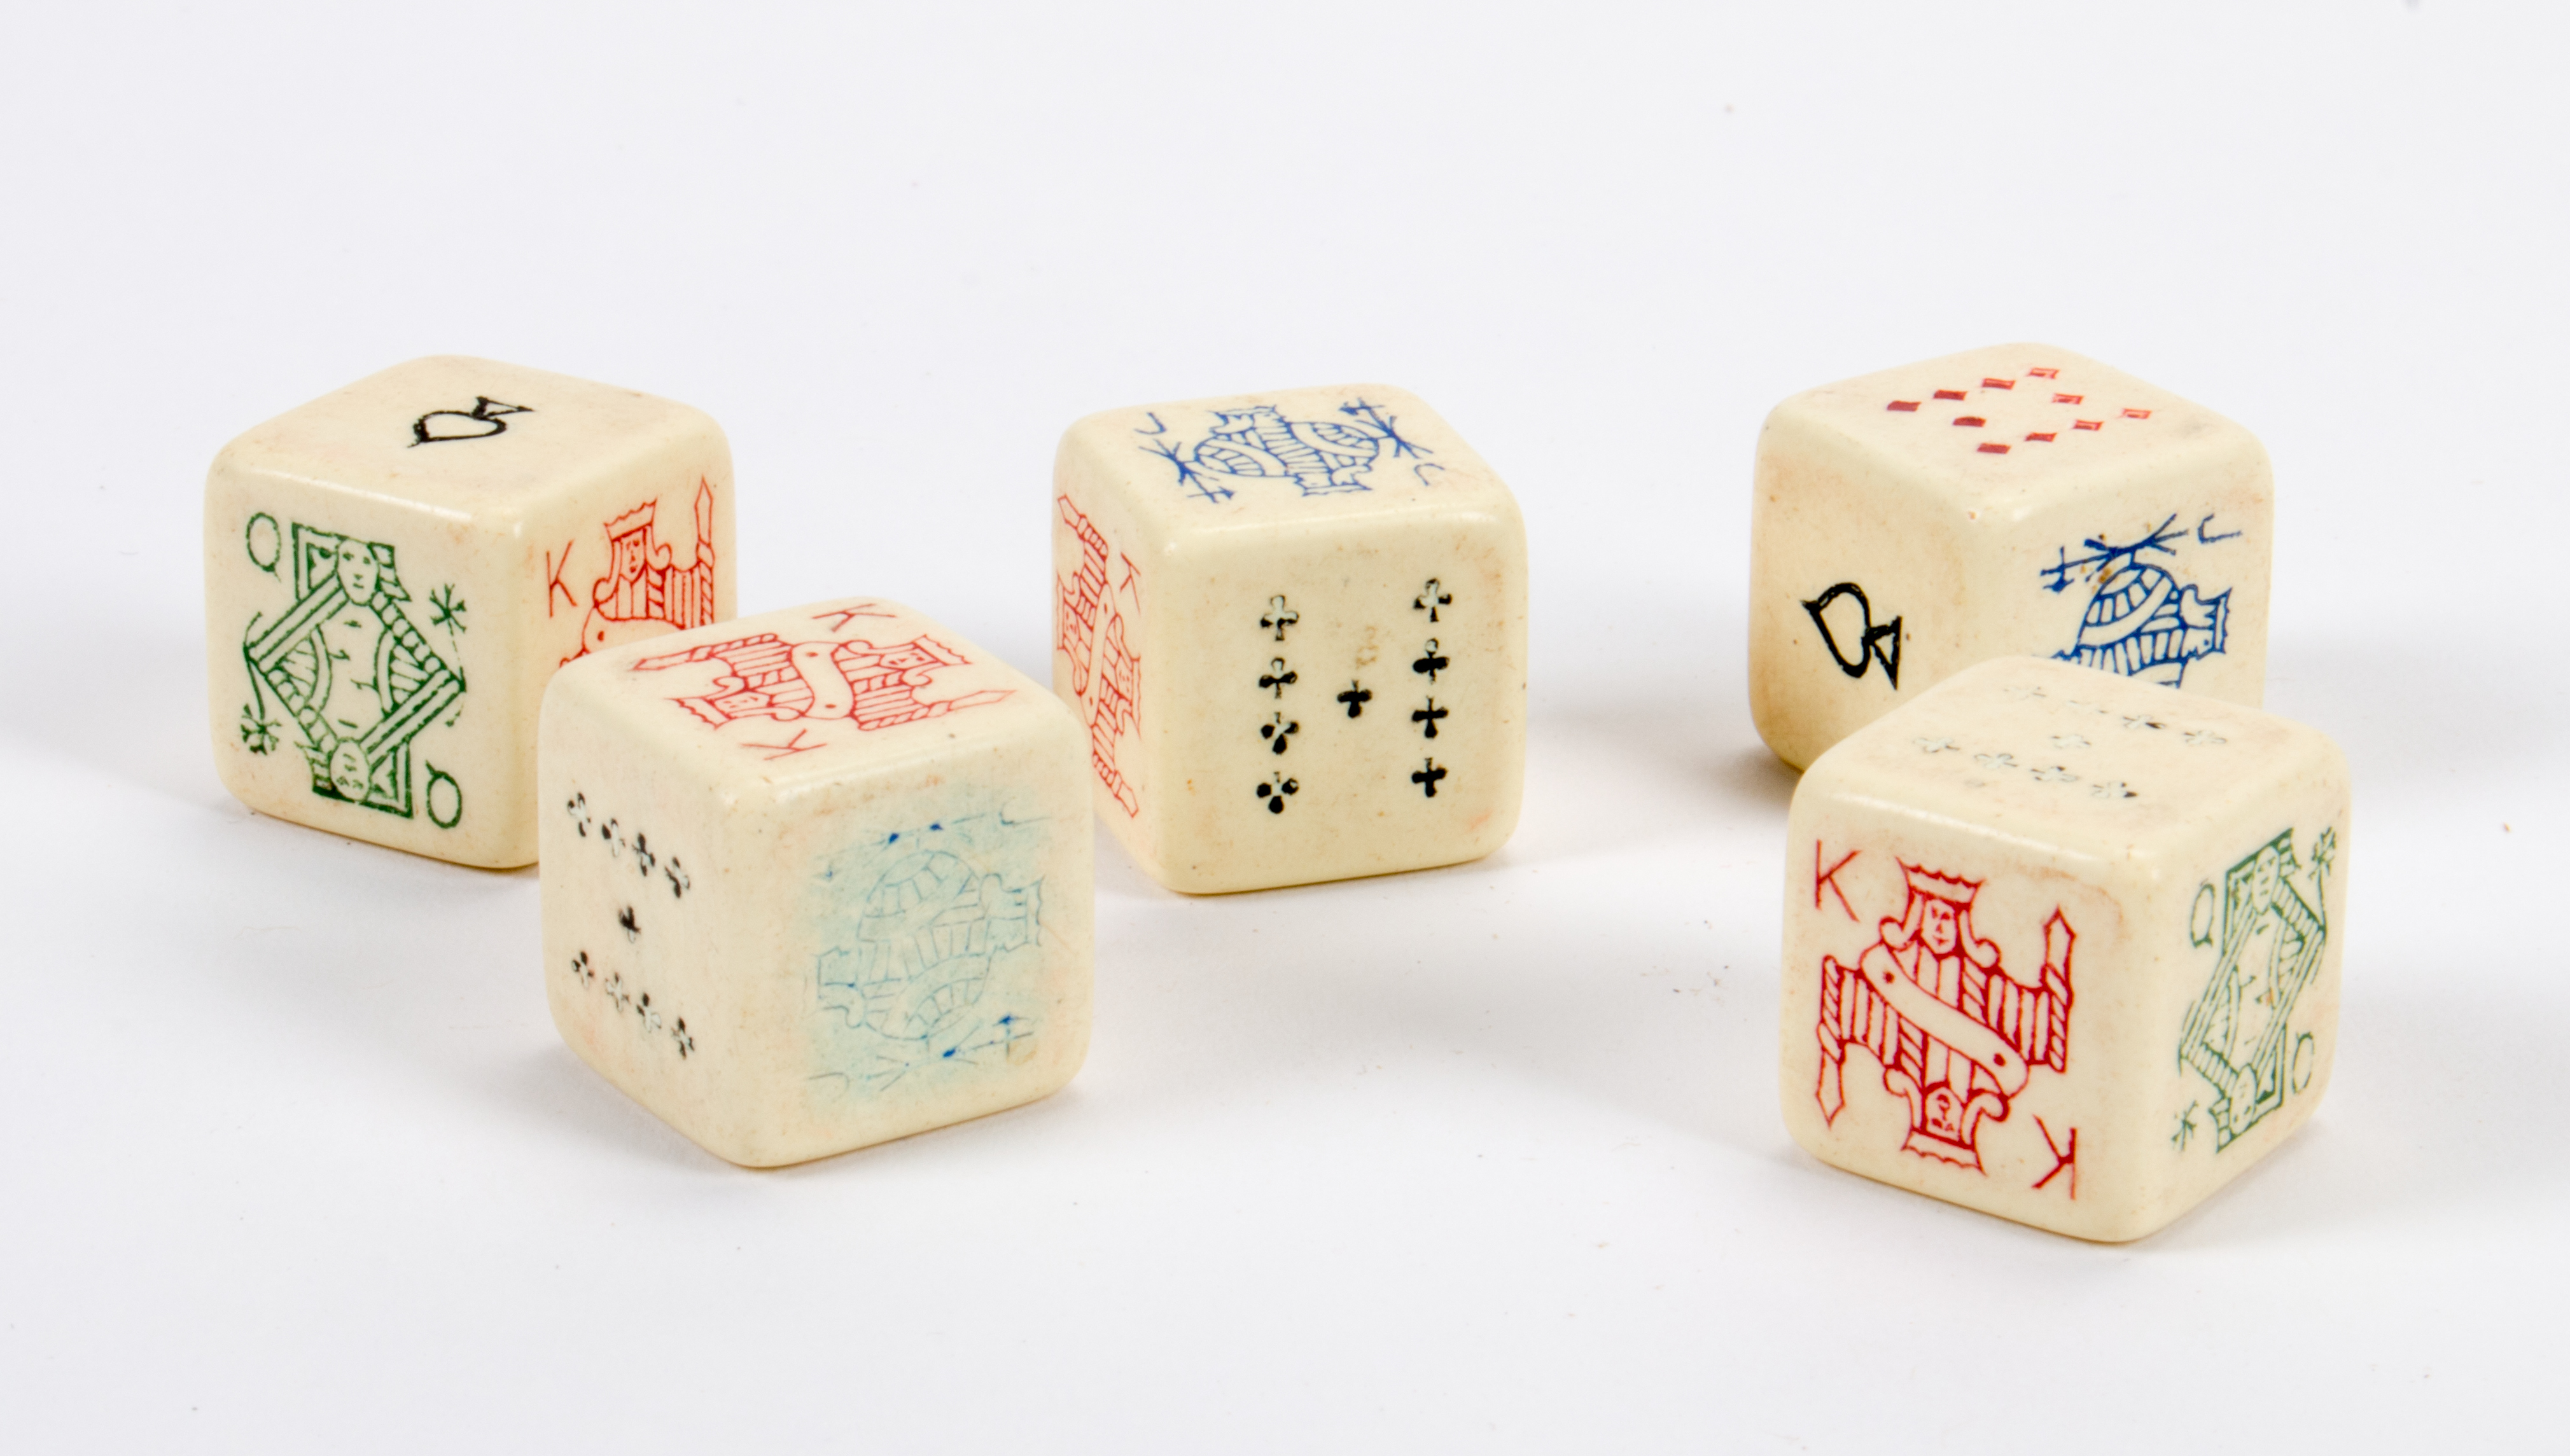 Are There Variations of Poker Dice?